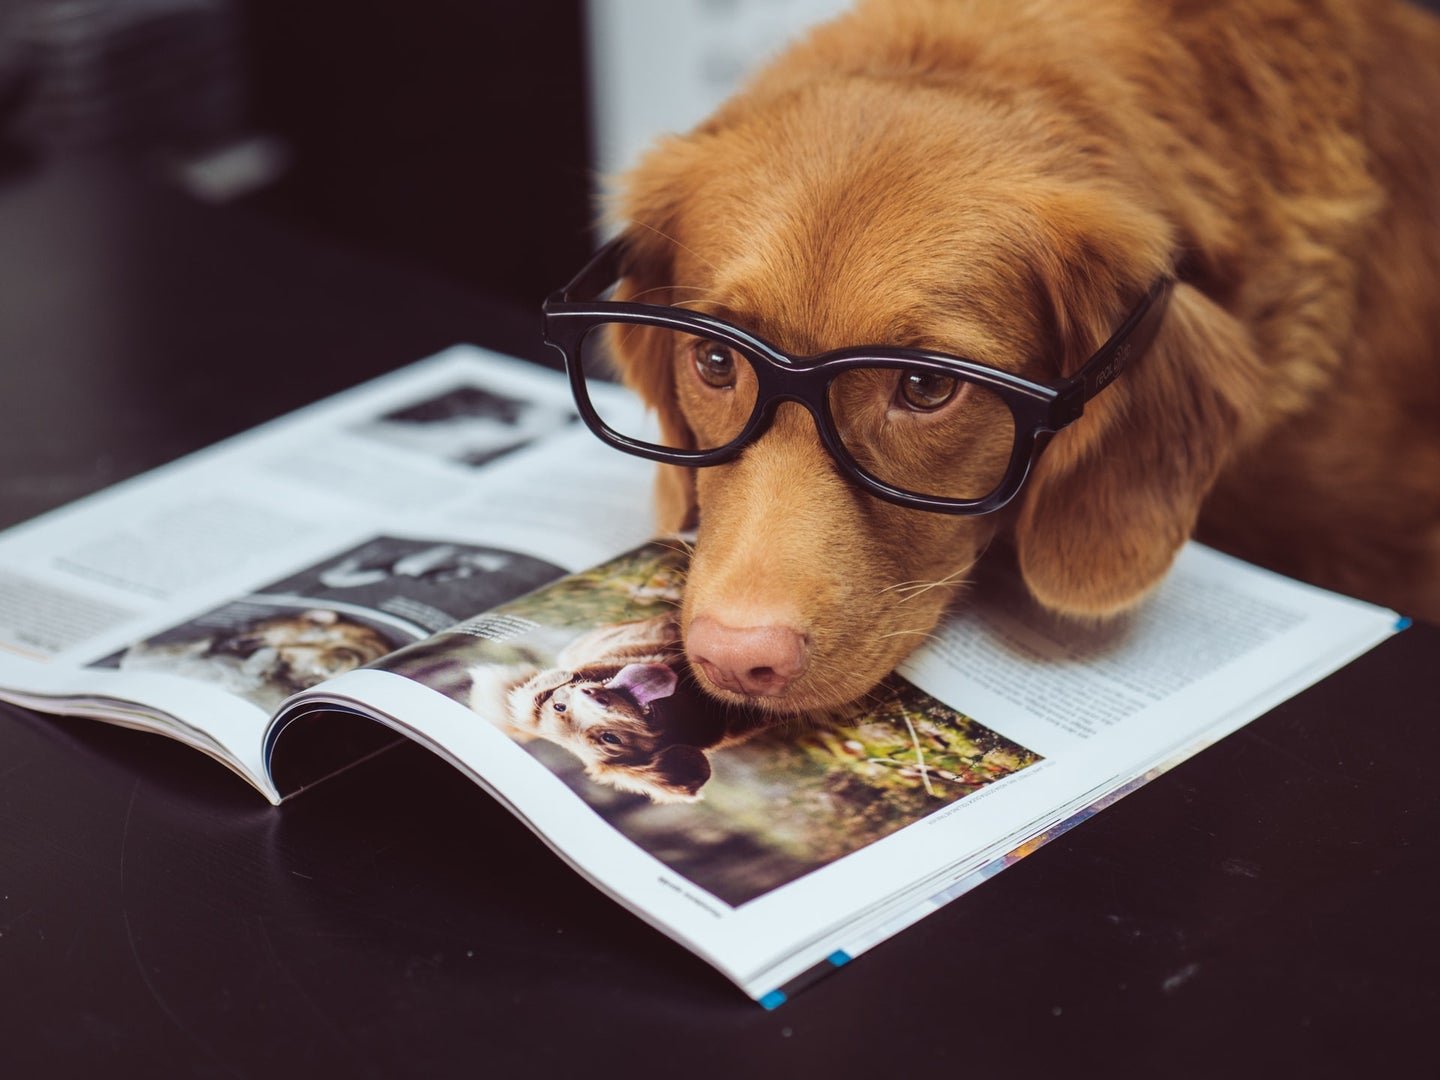 Is your dog actually smart? Here's how to test its IQ.